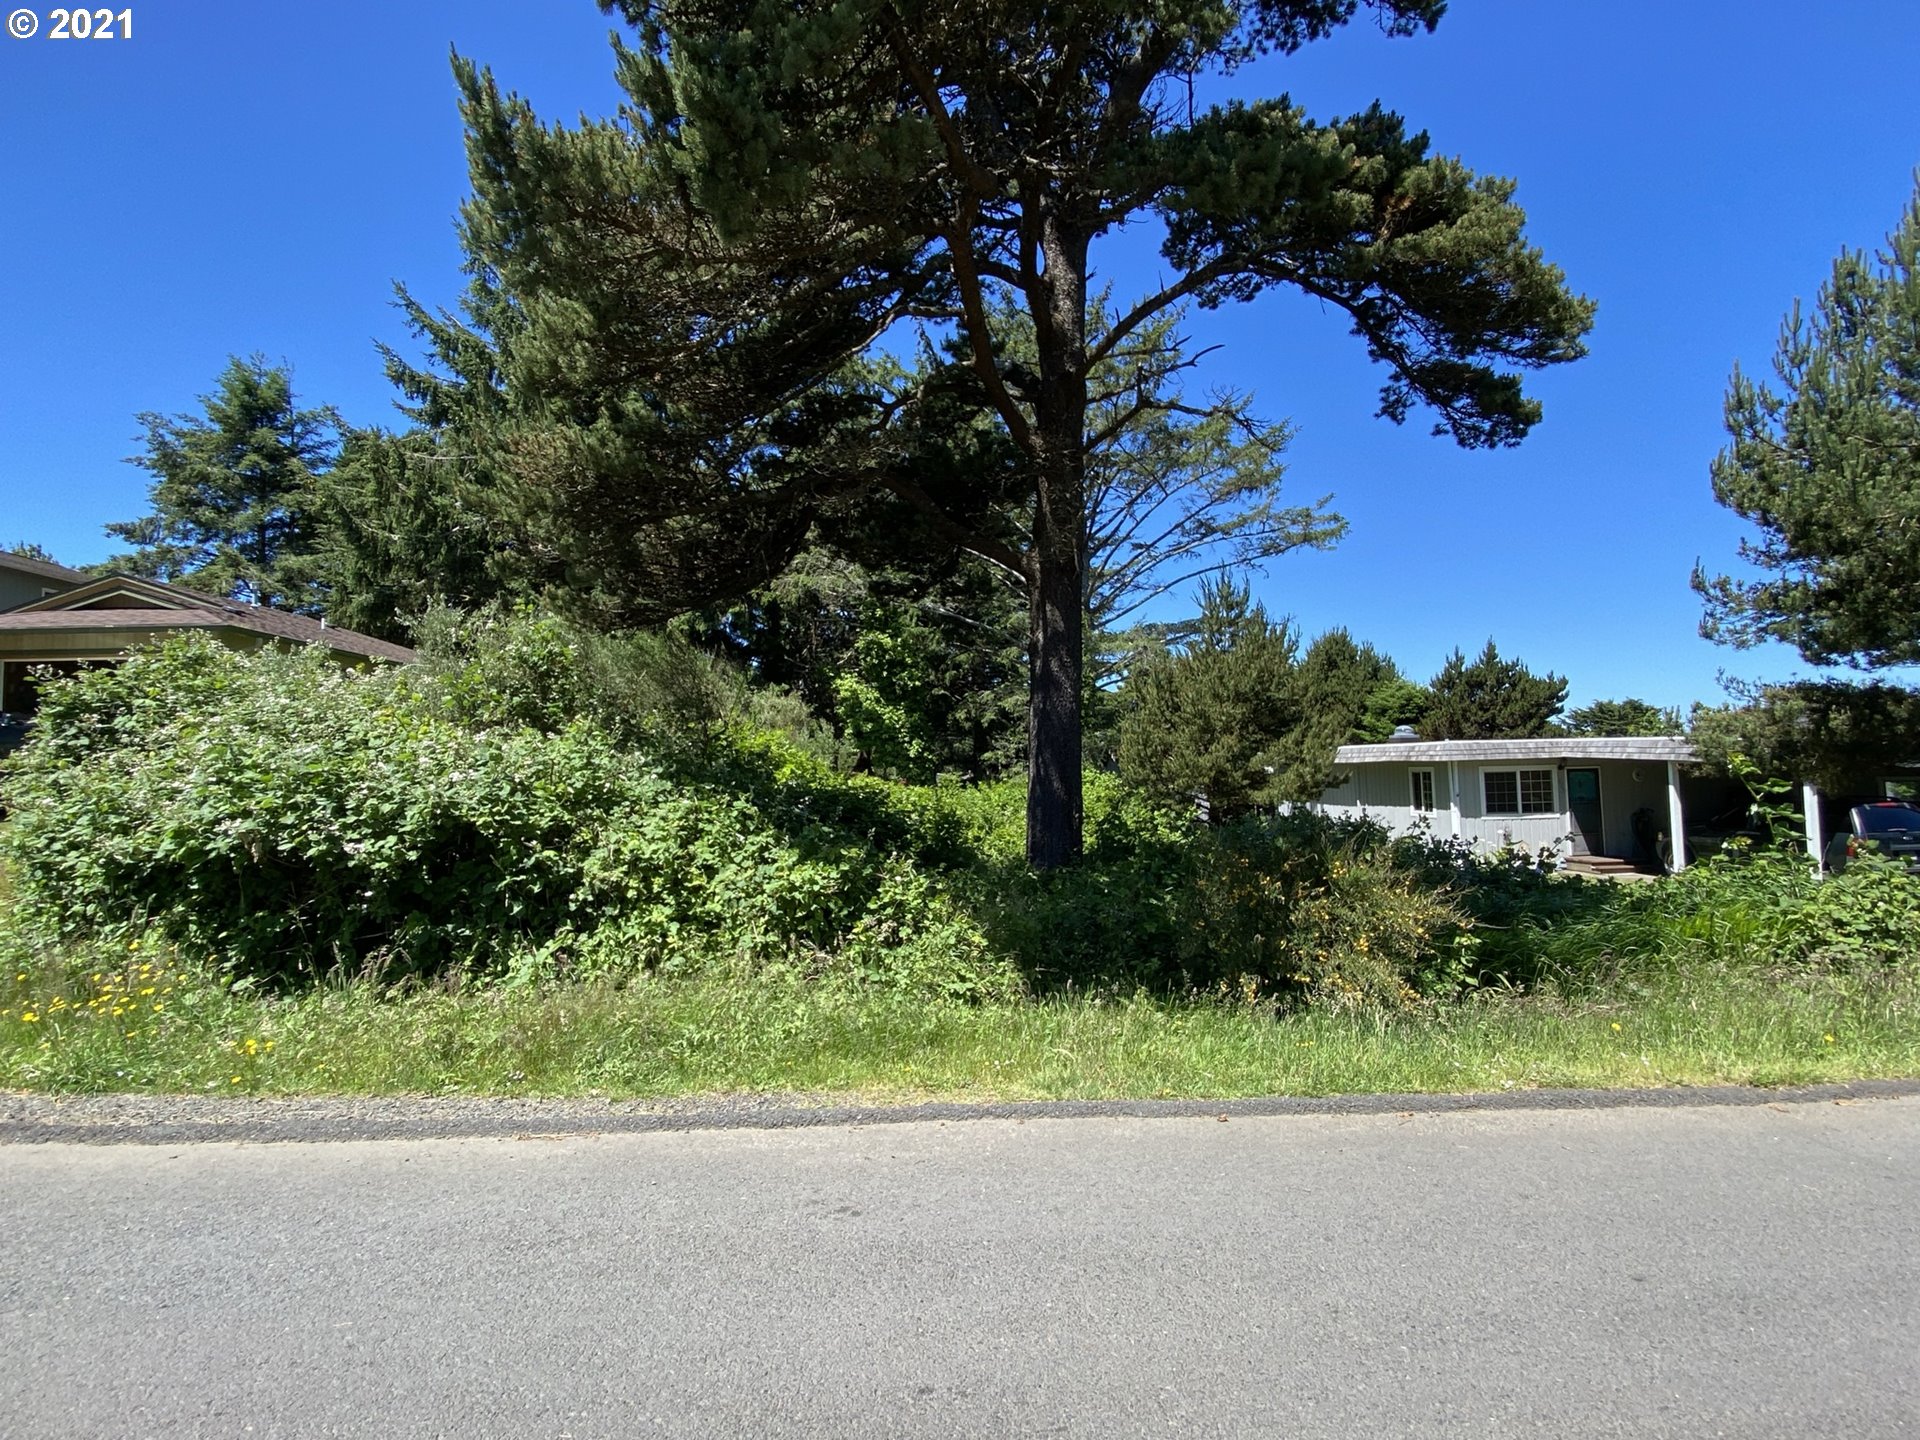 500 SE Jetty AVE (1 of 2)